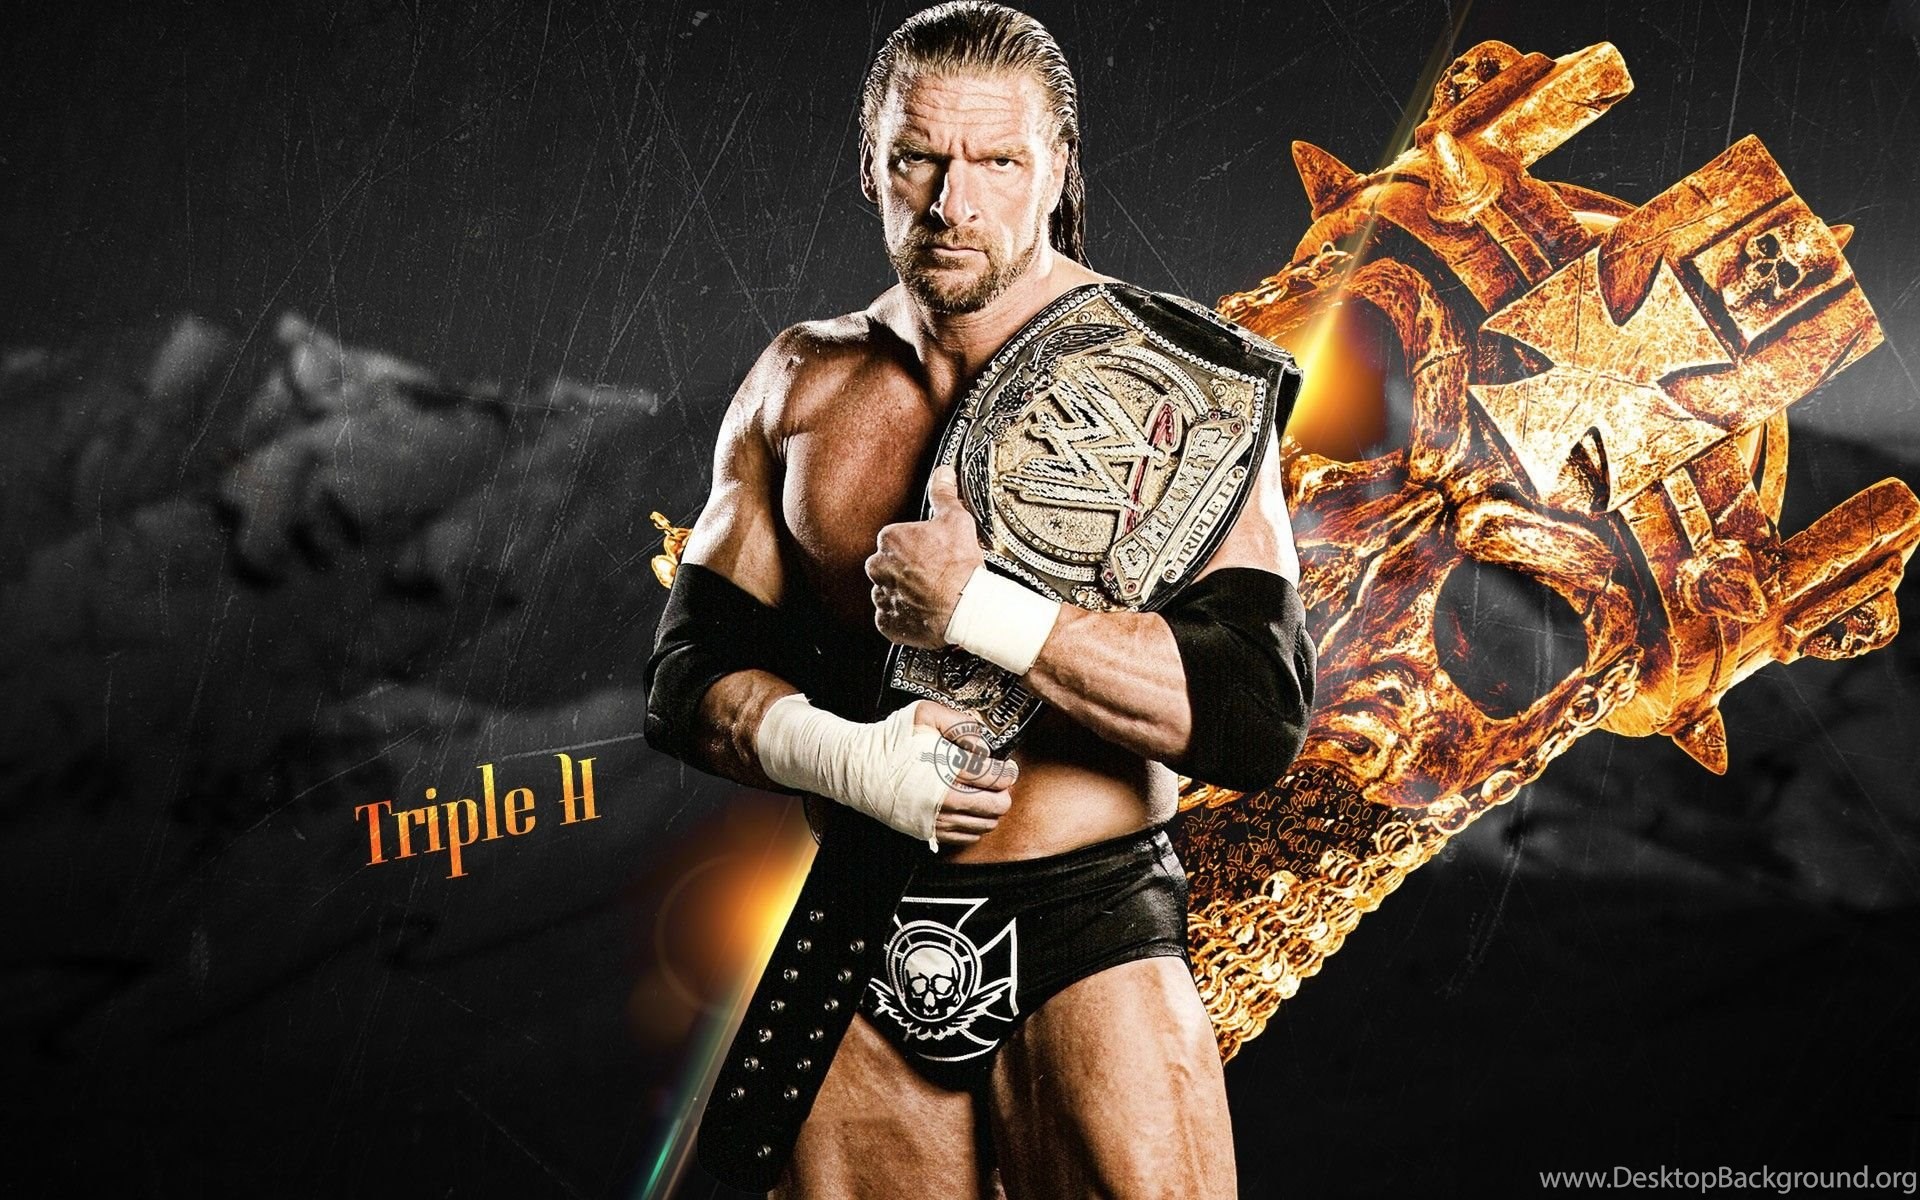 Download Download Triple H WWE Wallpapers AtozWallpapers Widescreen Widescr...